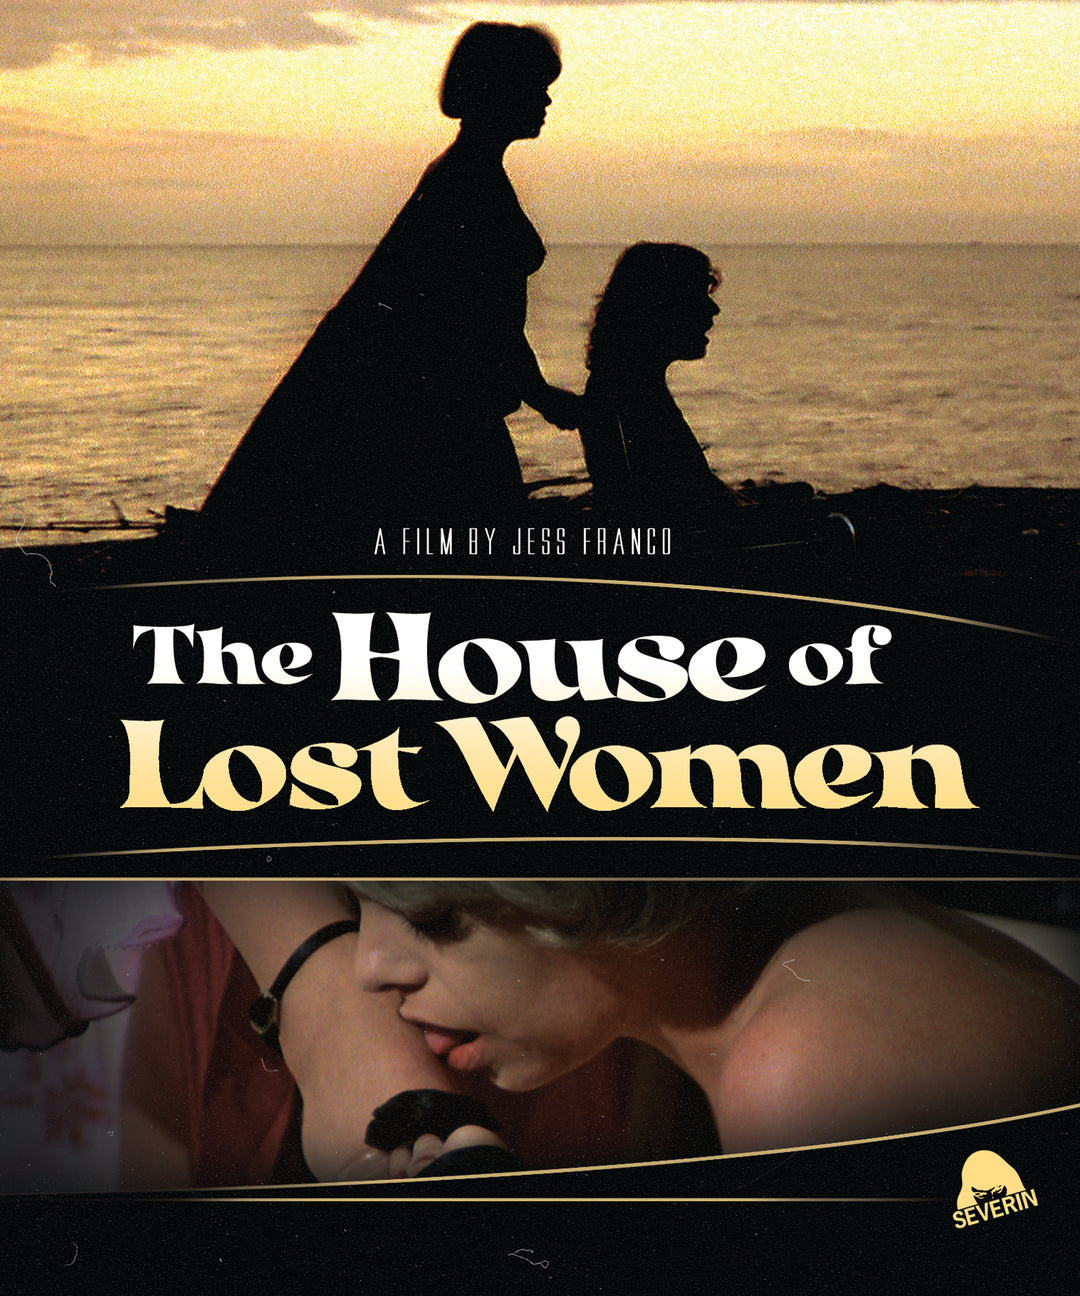 The House of Lost Women